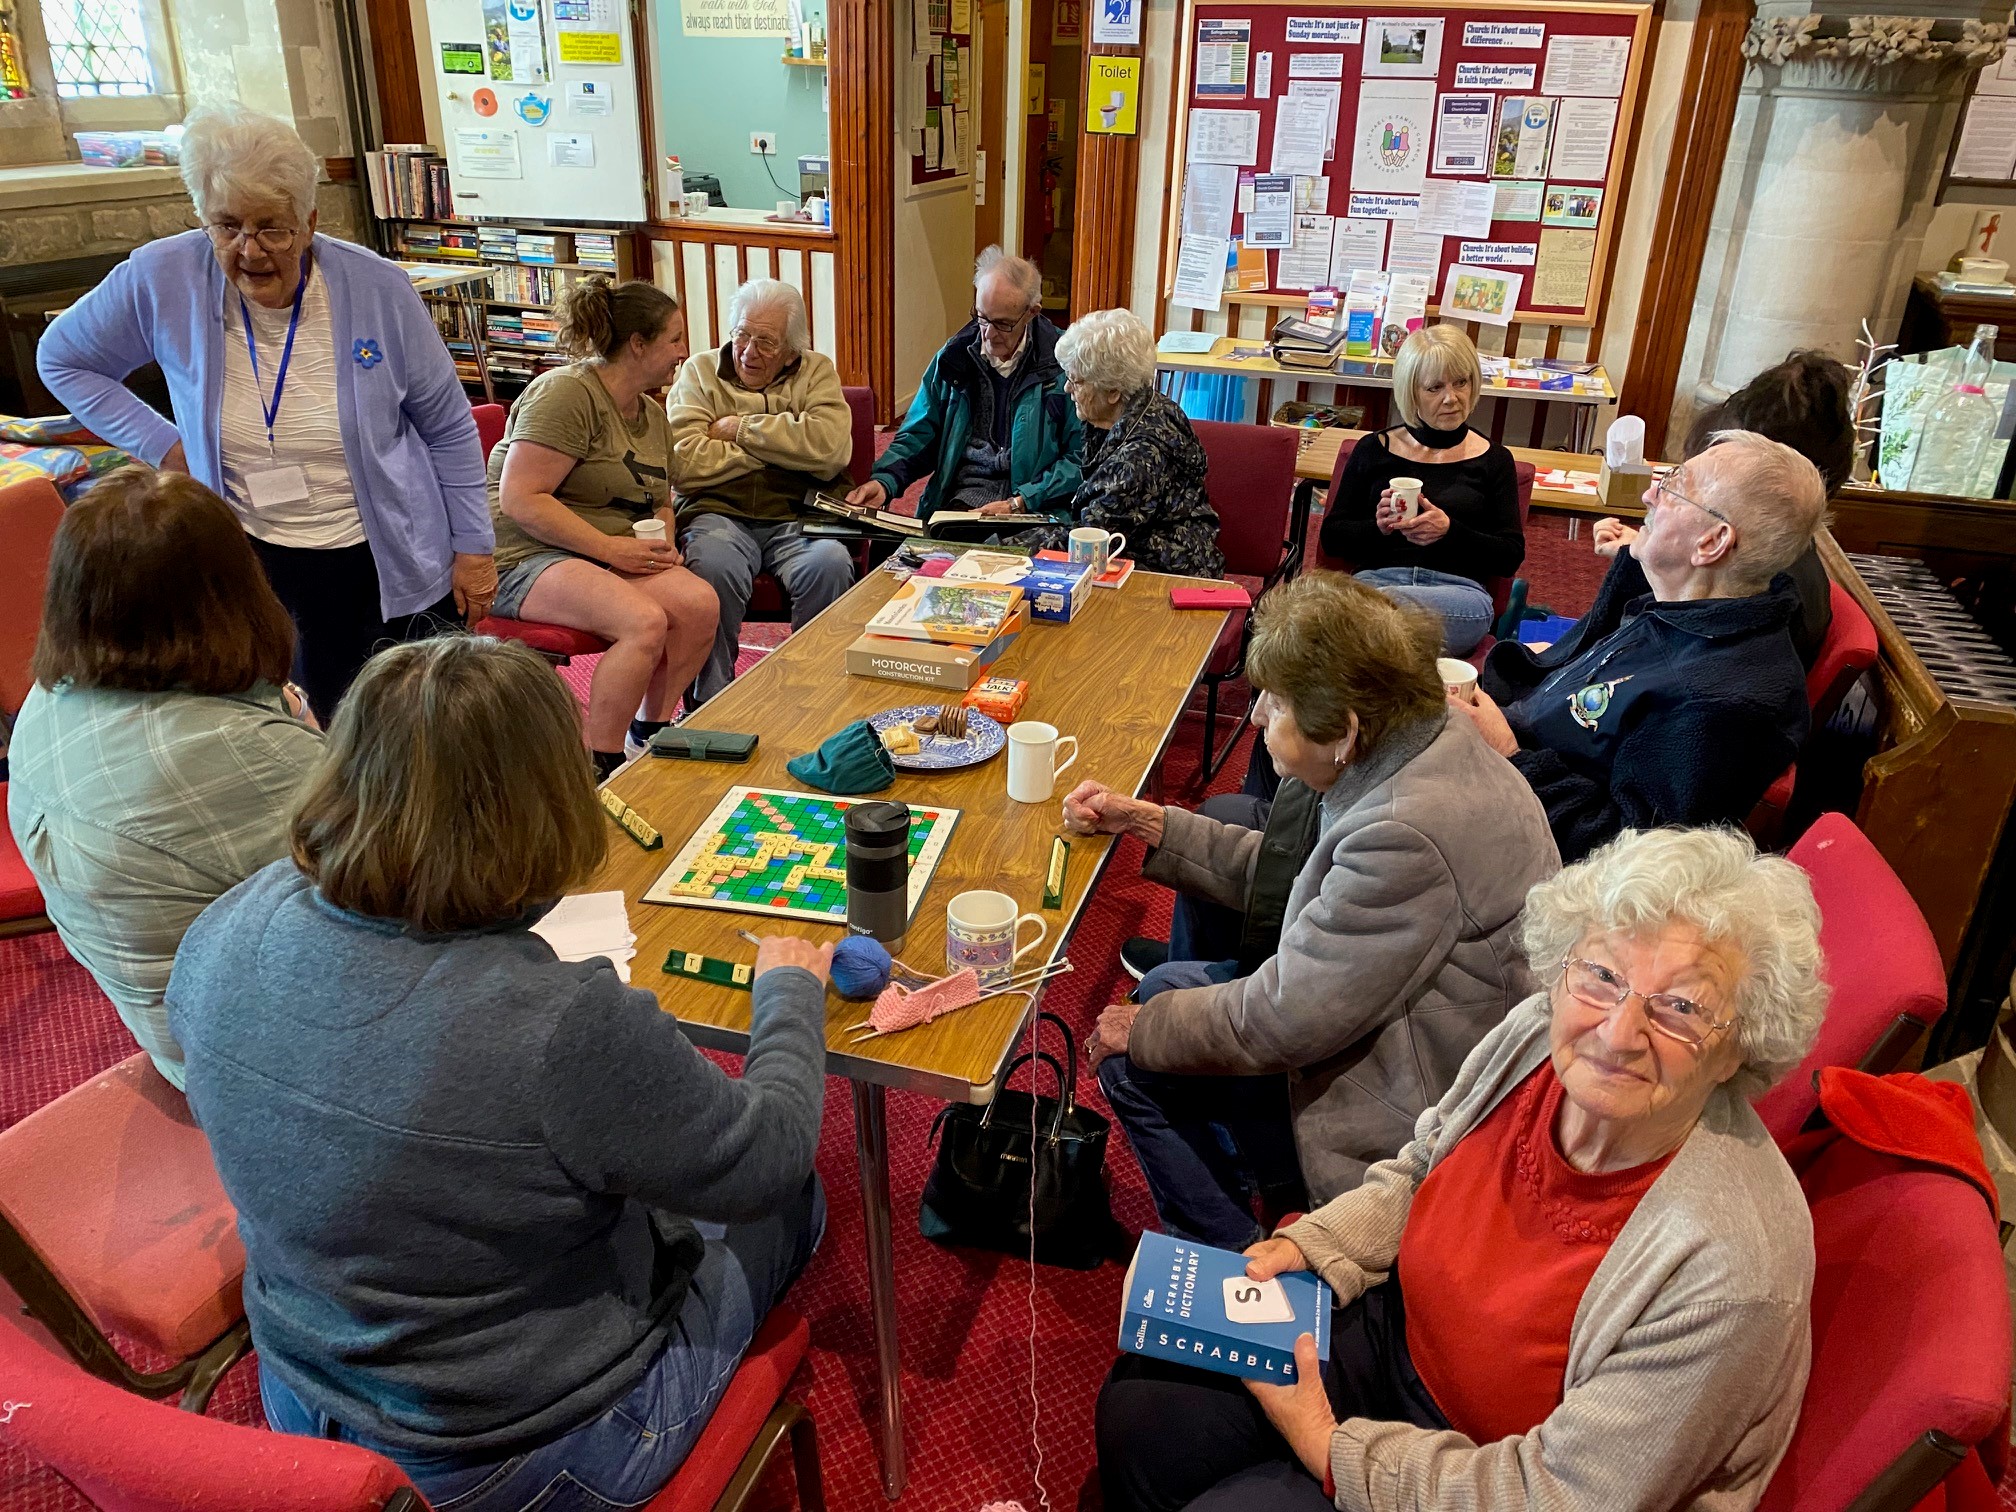 a dozen people sat round a table playing board games